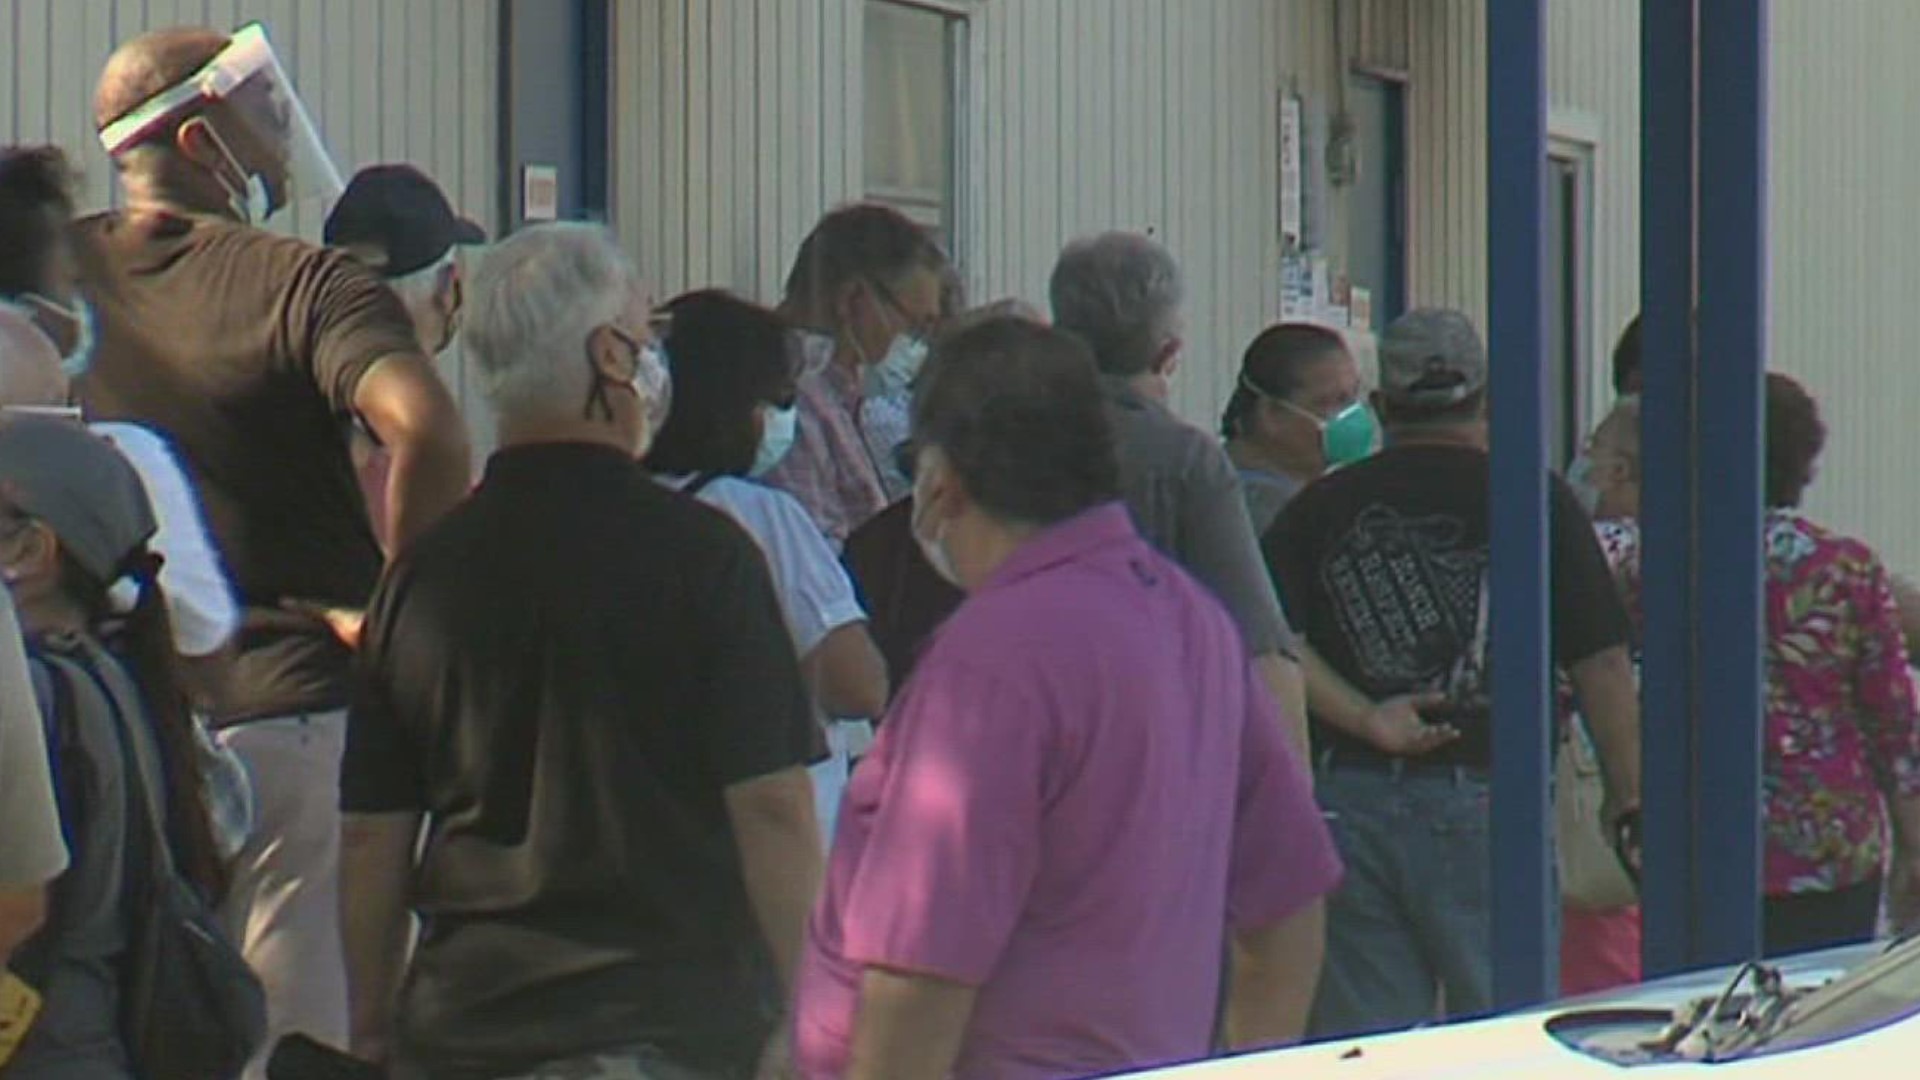 More than 600 residents cast their ballots between in person and mail in's.